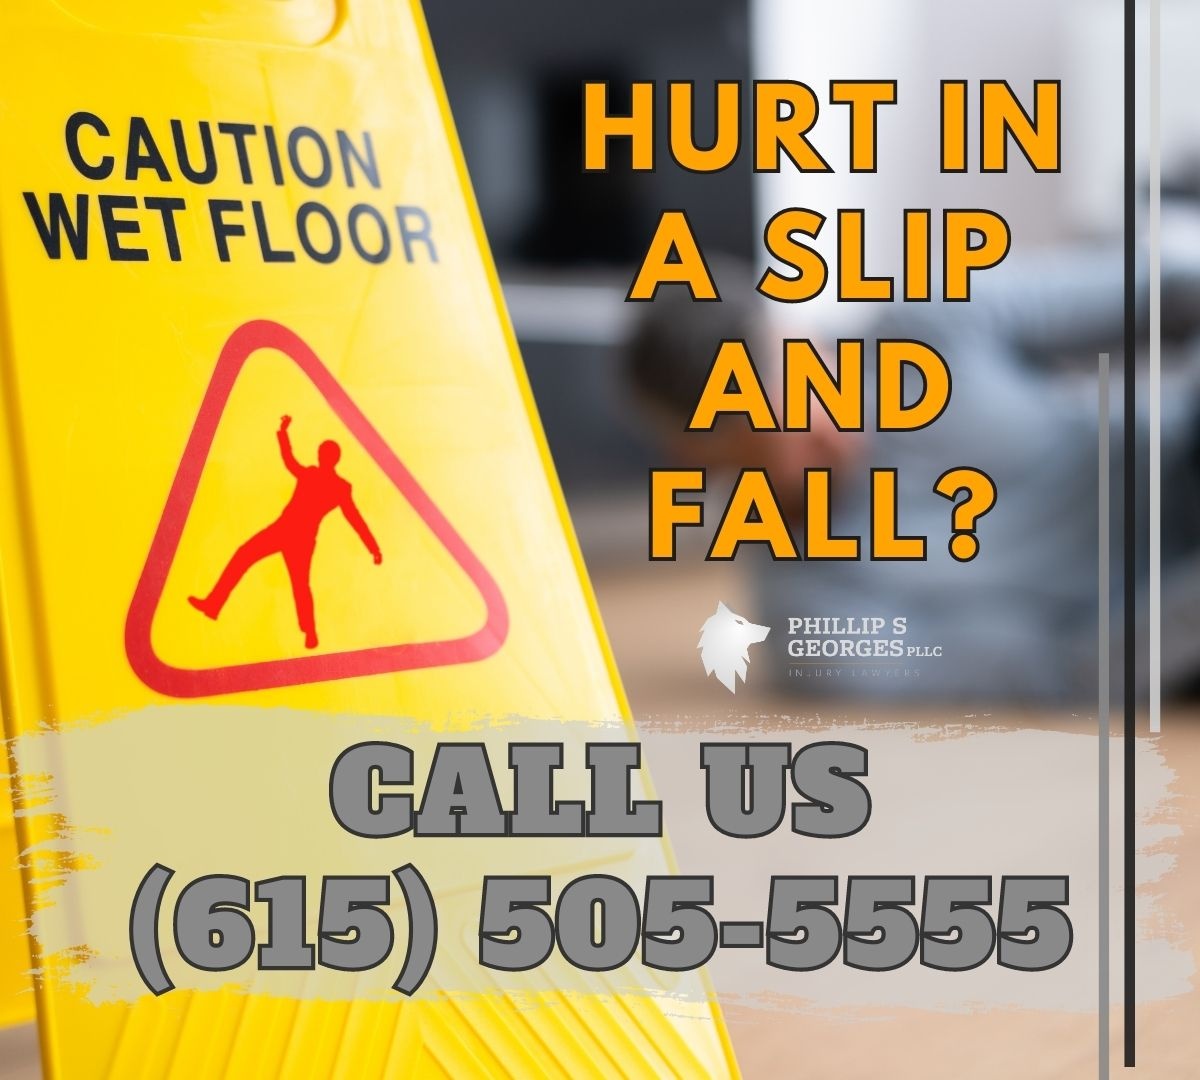 Were you hurt in a slip and fall? The Wolf Pack® is here to simplify the legal process of recovering your damages so that you can get back on your feet! #wolfpacklawyers #wolfpack #slipandfall #personalinjurylawyers #lawfirm #Nashville #Milwaukee